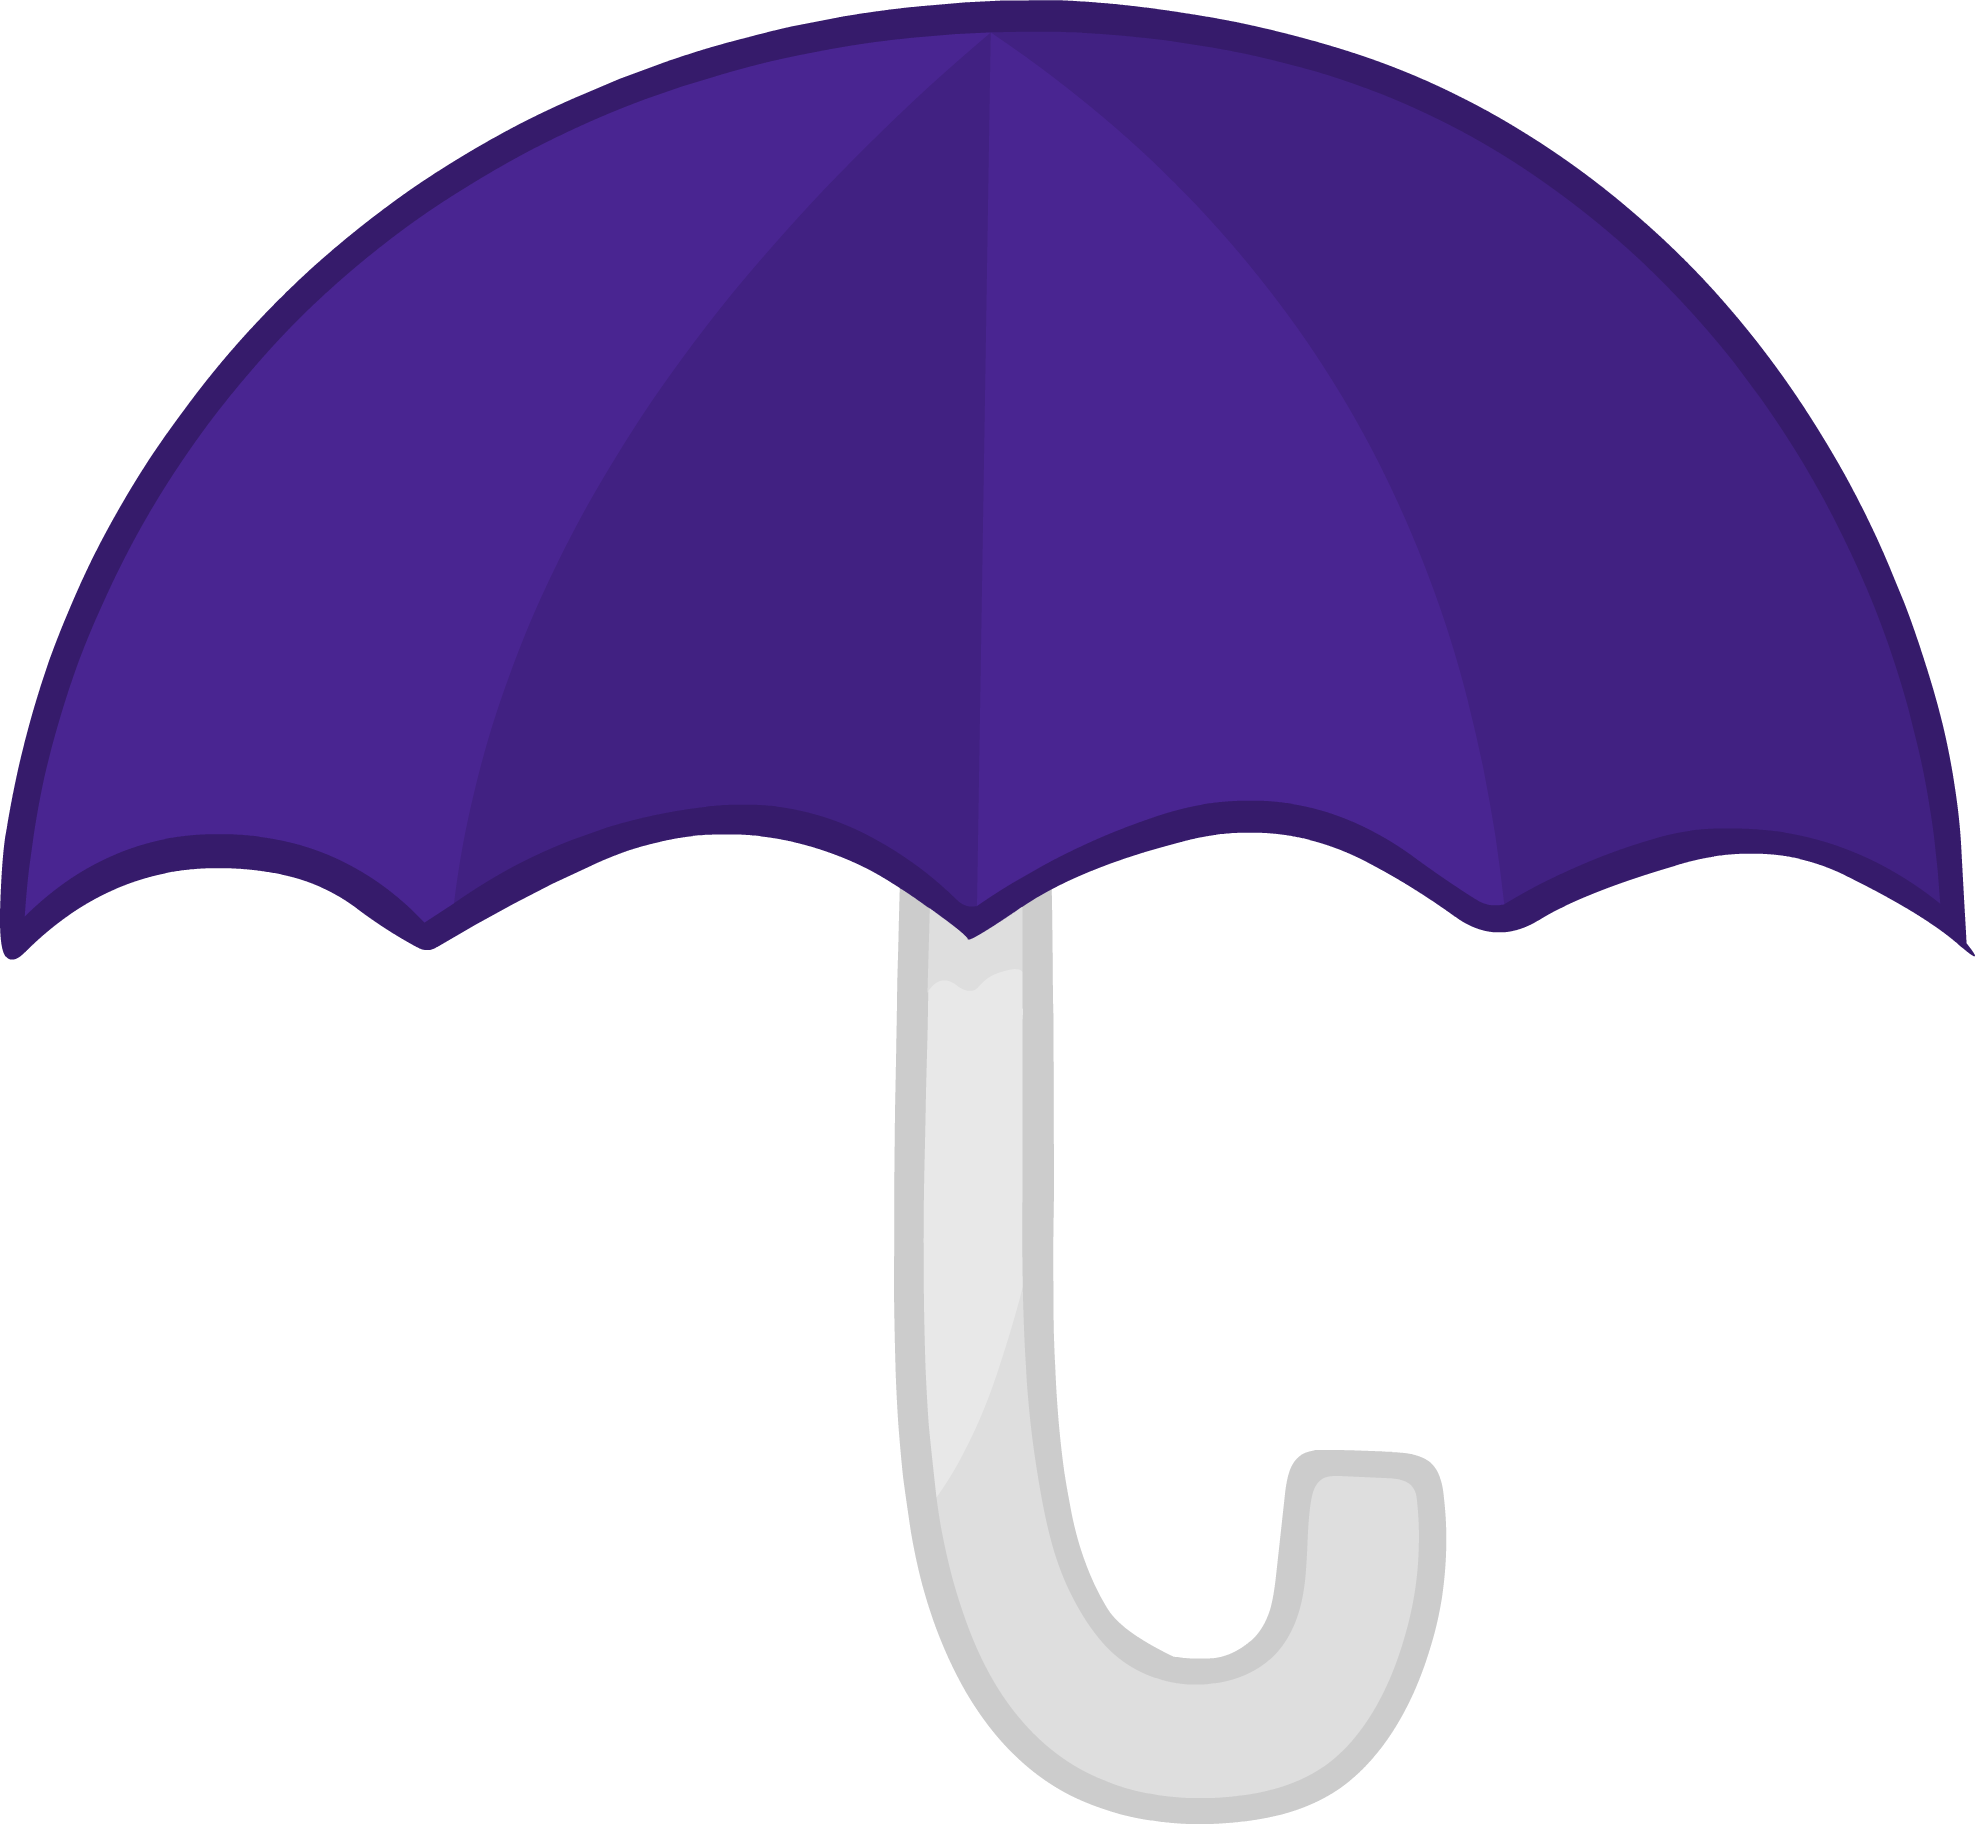 Image body png object. Lavender clipart umbrella